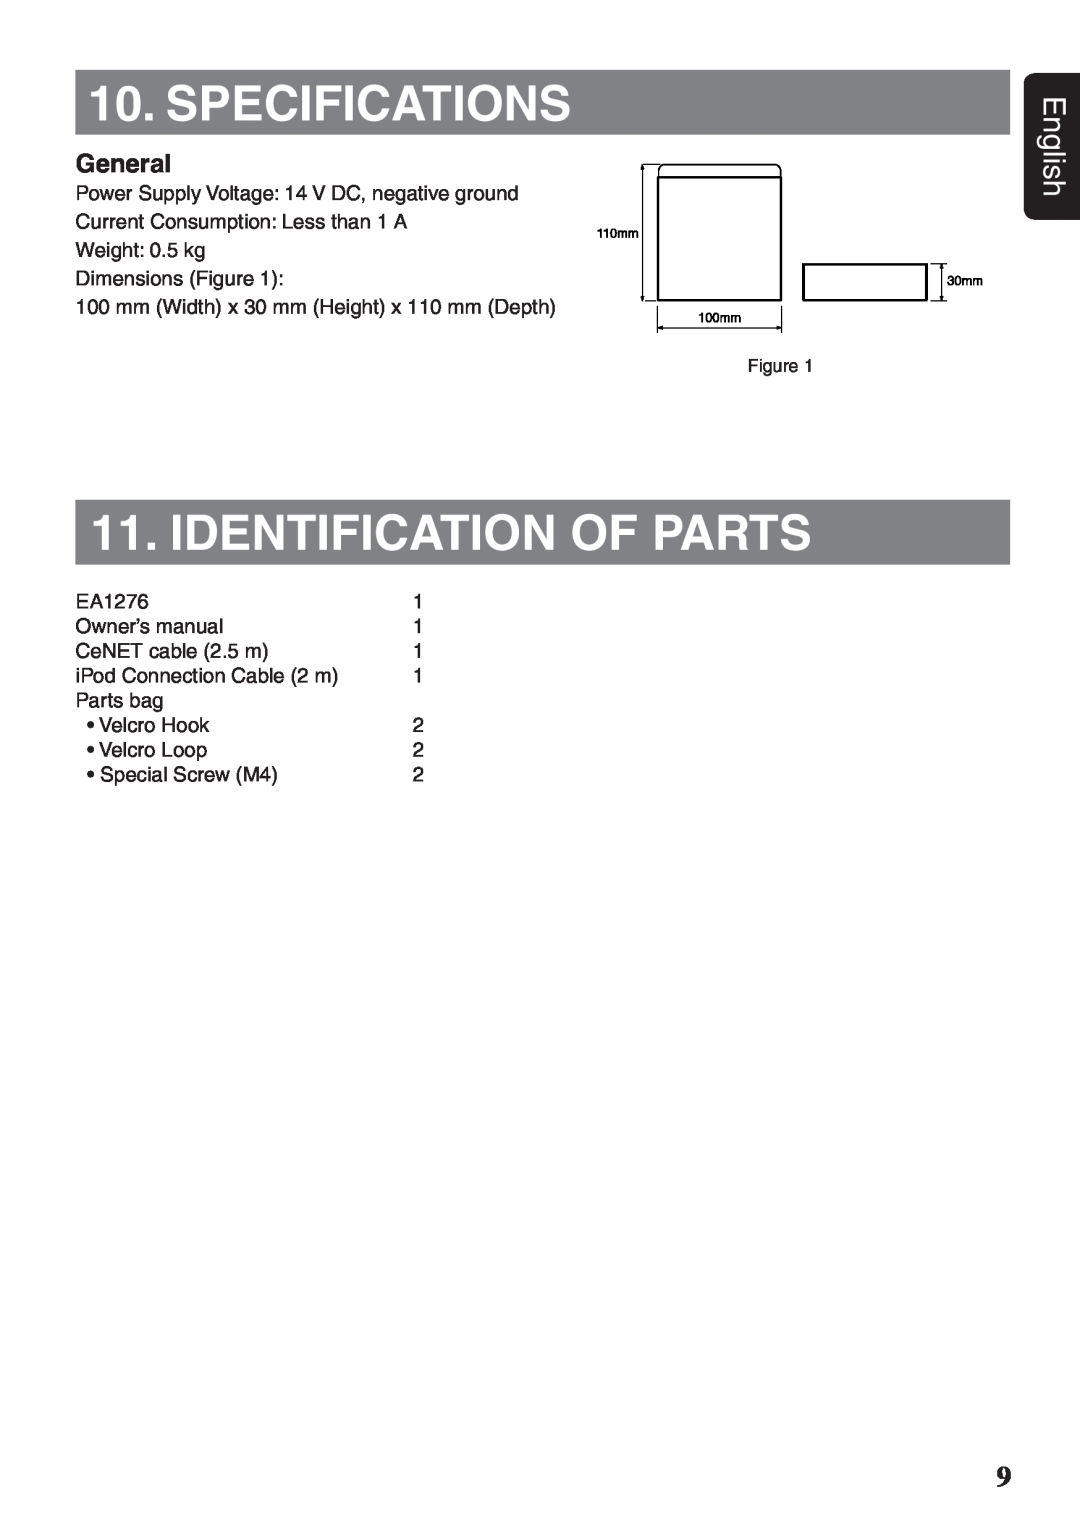 Clarion EA1276 owner manual Specifications, Identification Of Parts, General, English 